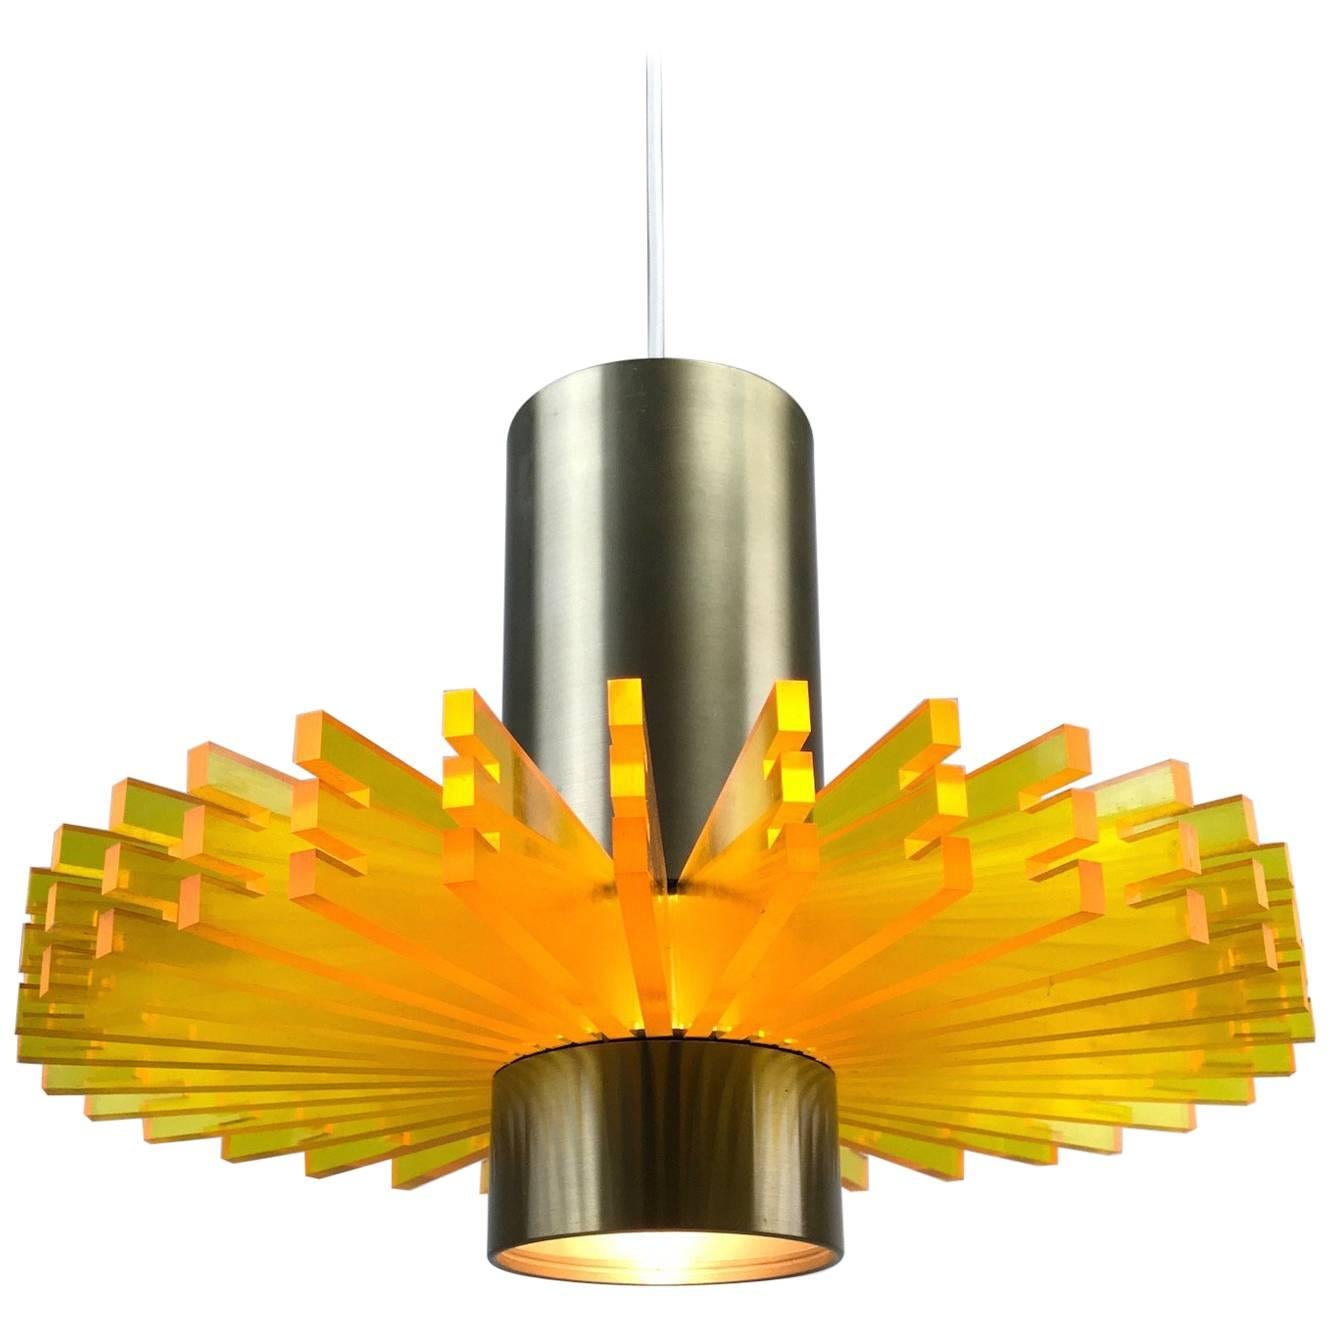 Danish Symphonie Ceiling Light by Claus Bolby for CEBO